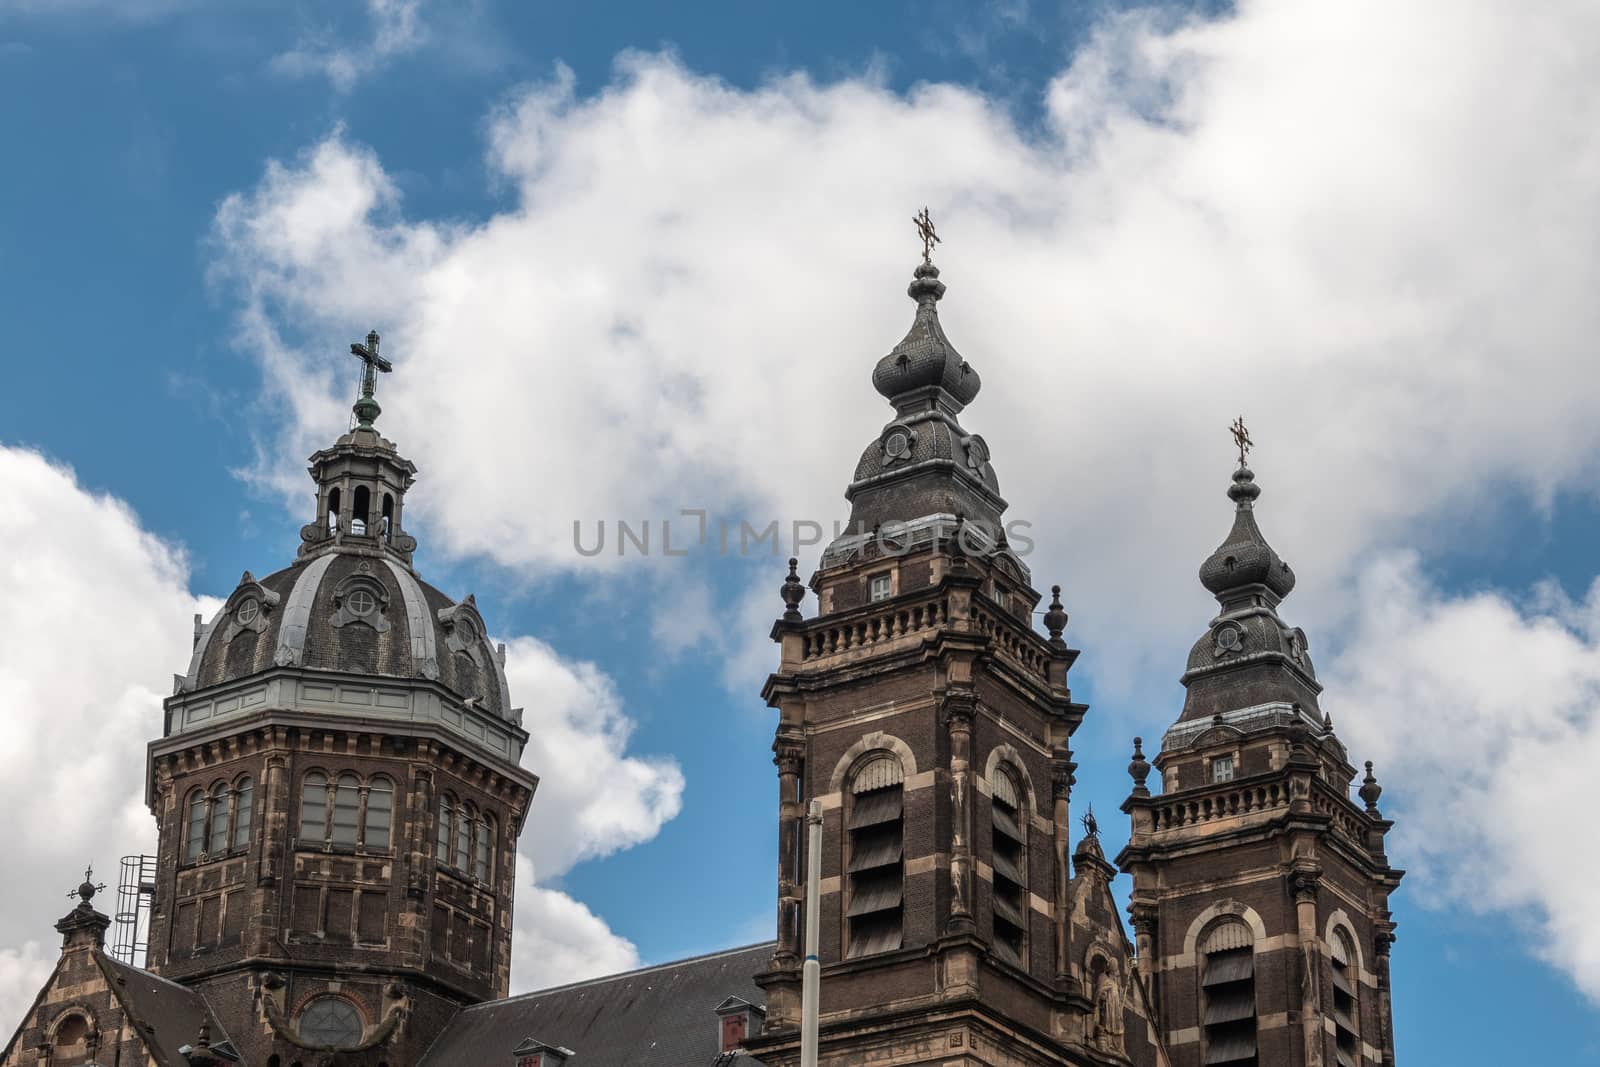 Amsterdam, the Netherlands - July 1, 2019: Red brick with white trim towers and roof structure of Basilica of Saint Nicolas under cloudscape.